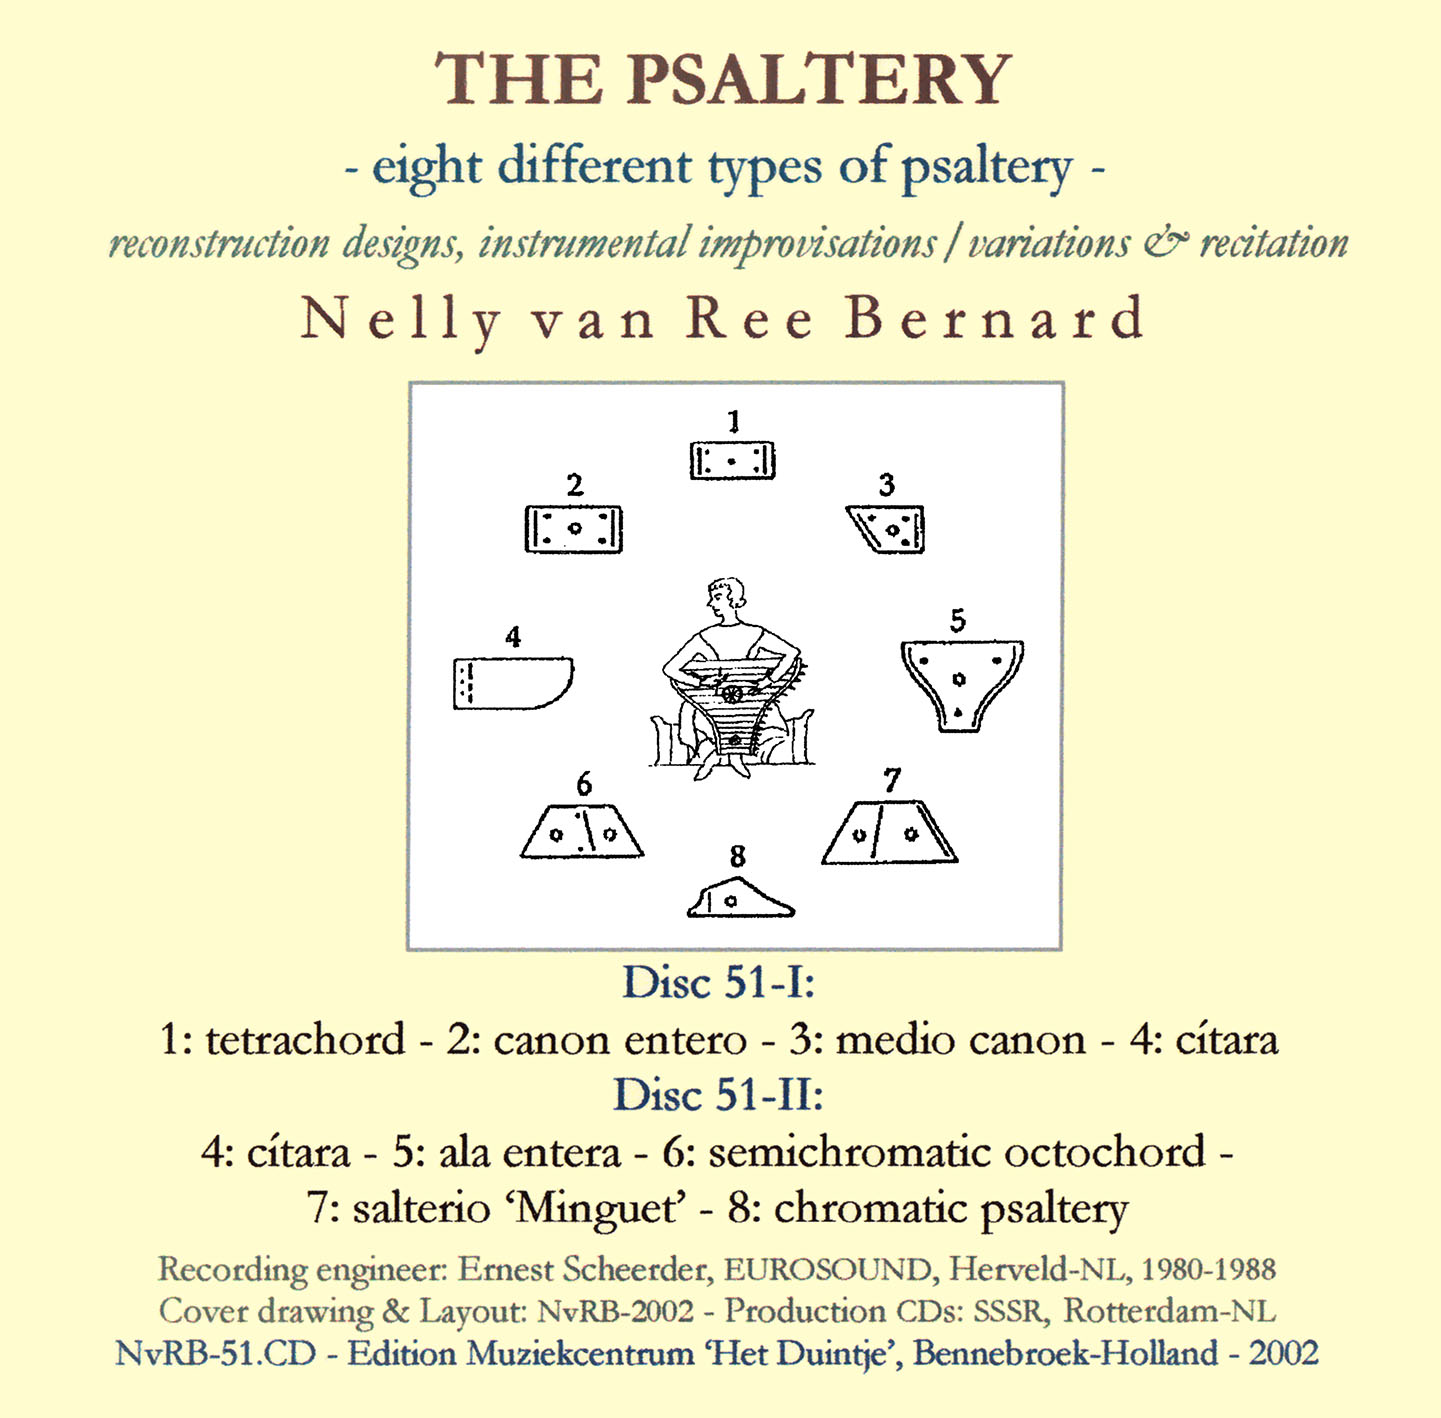 THE PSALTERY